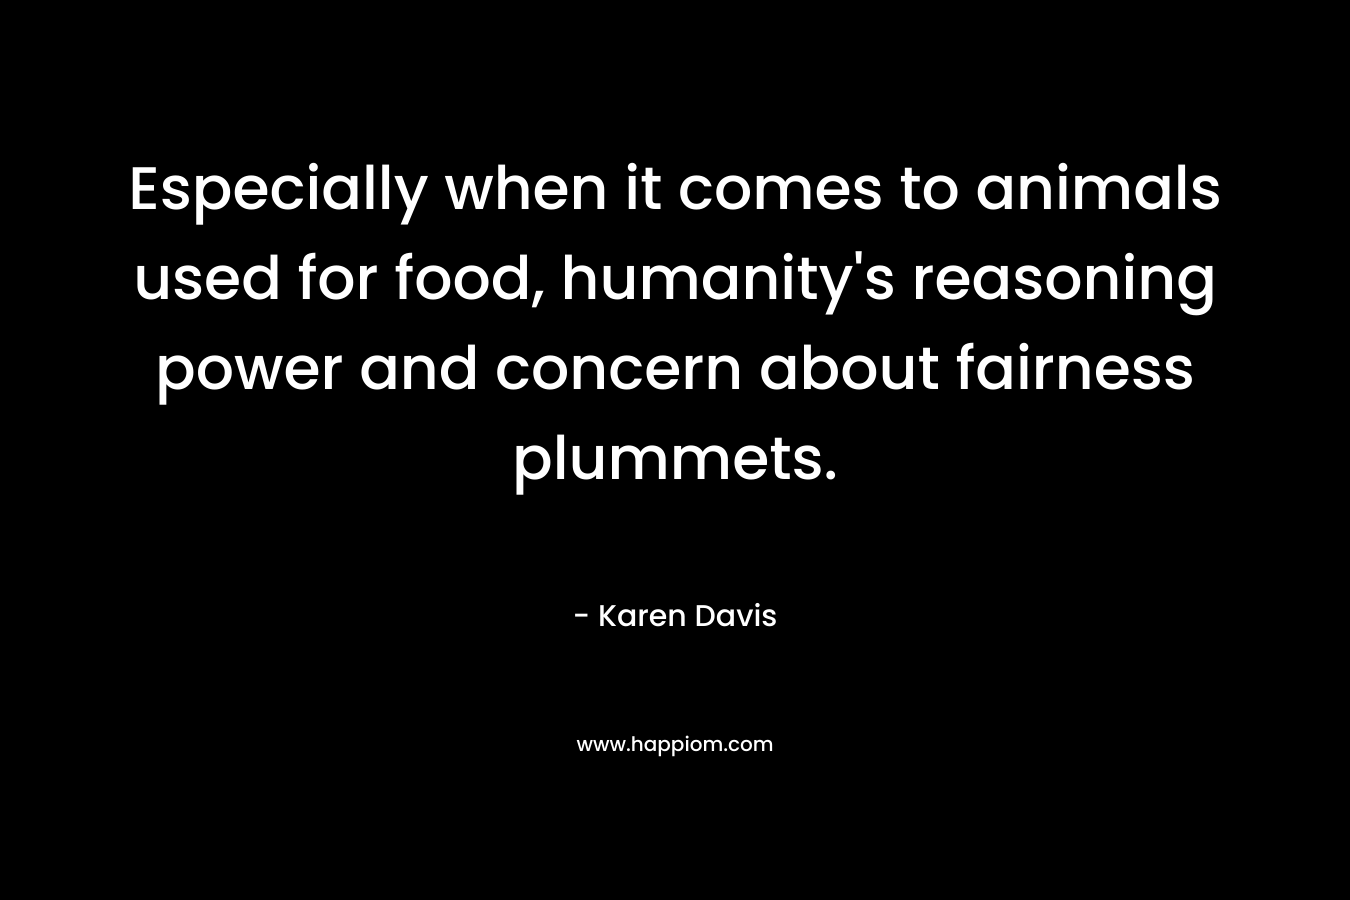 Especially when it comes to animals used for food, humanity’s reasoning power and concern about fairness plummets. – Karen Davis